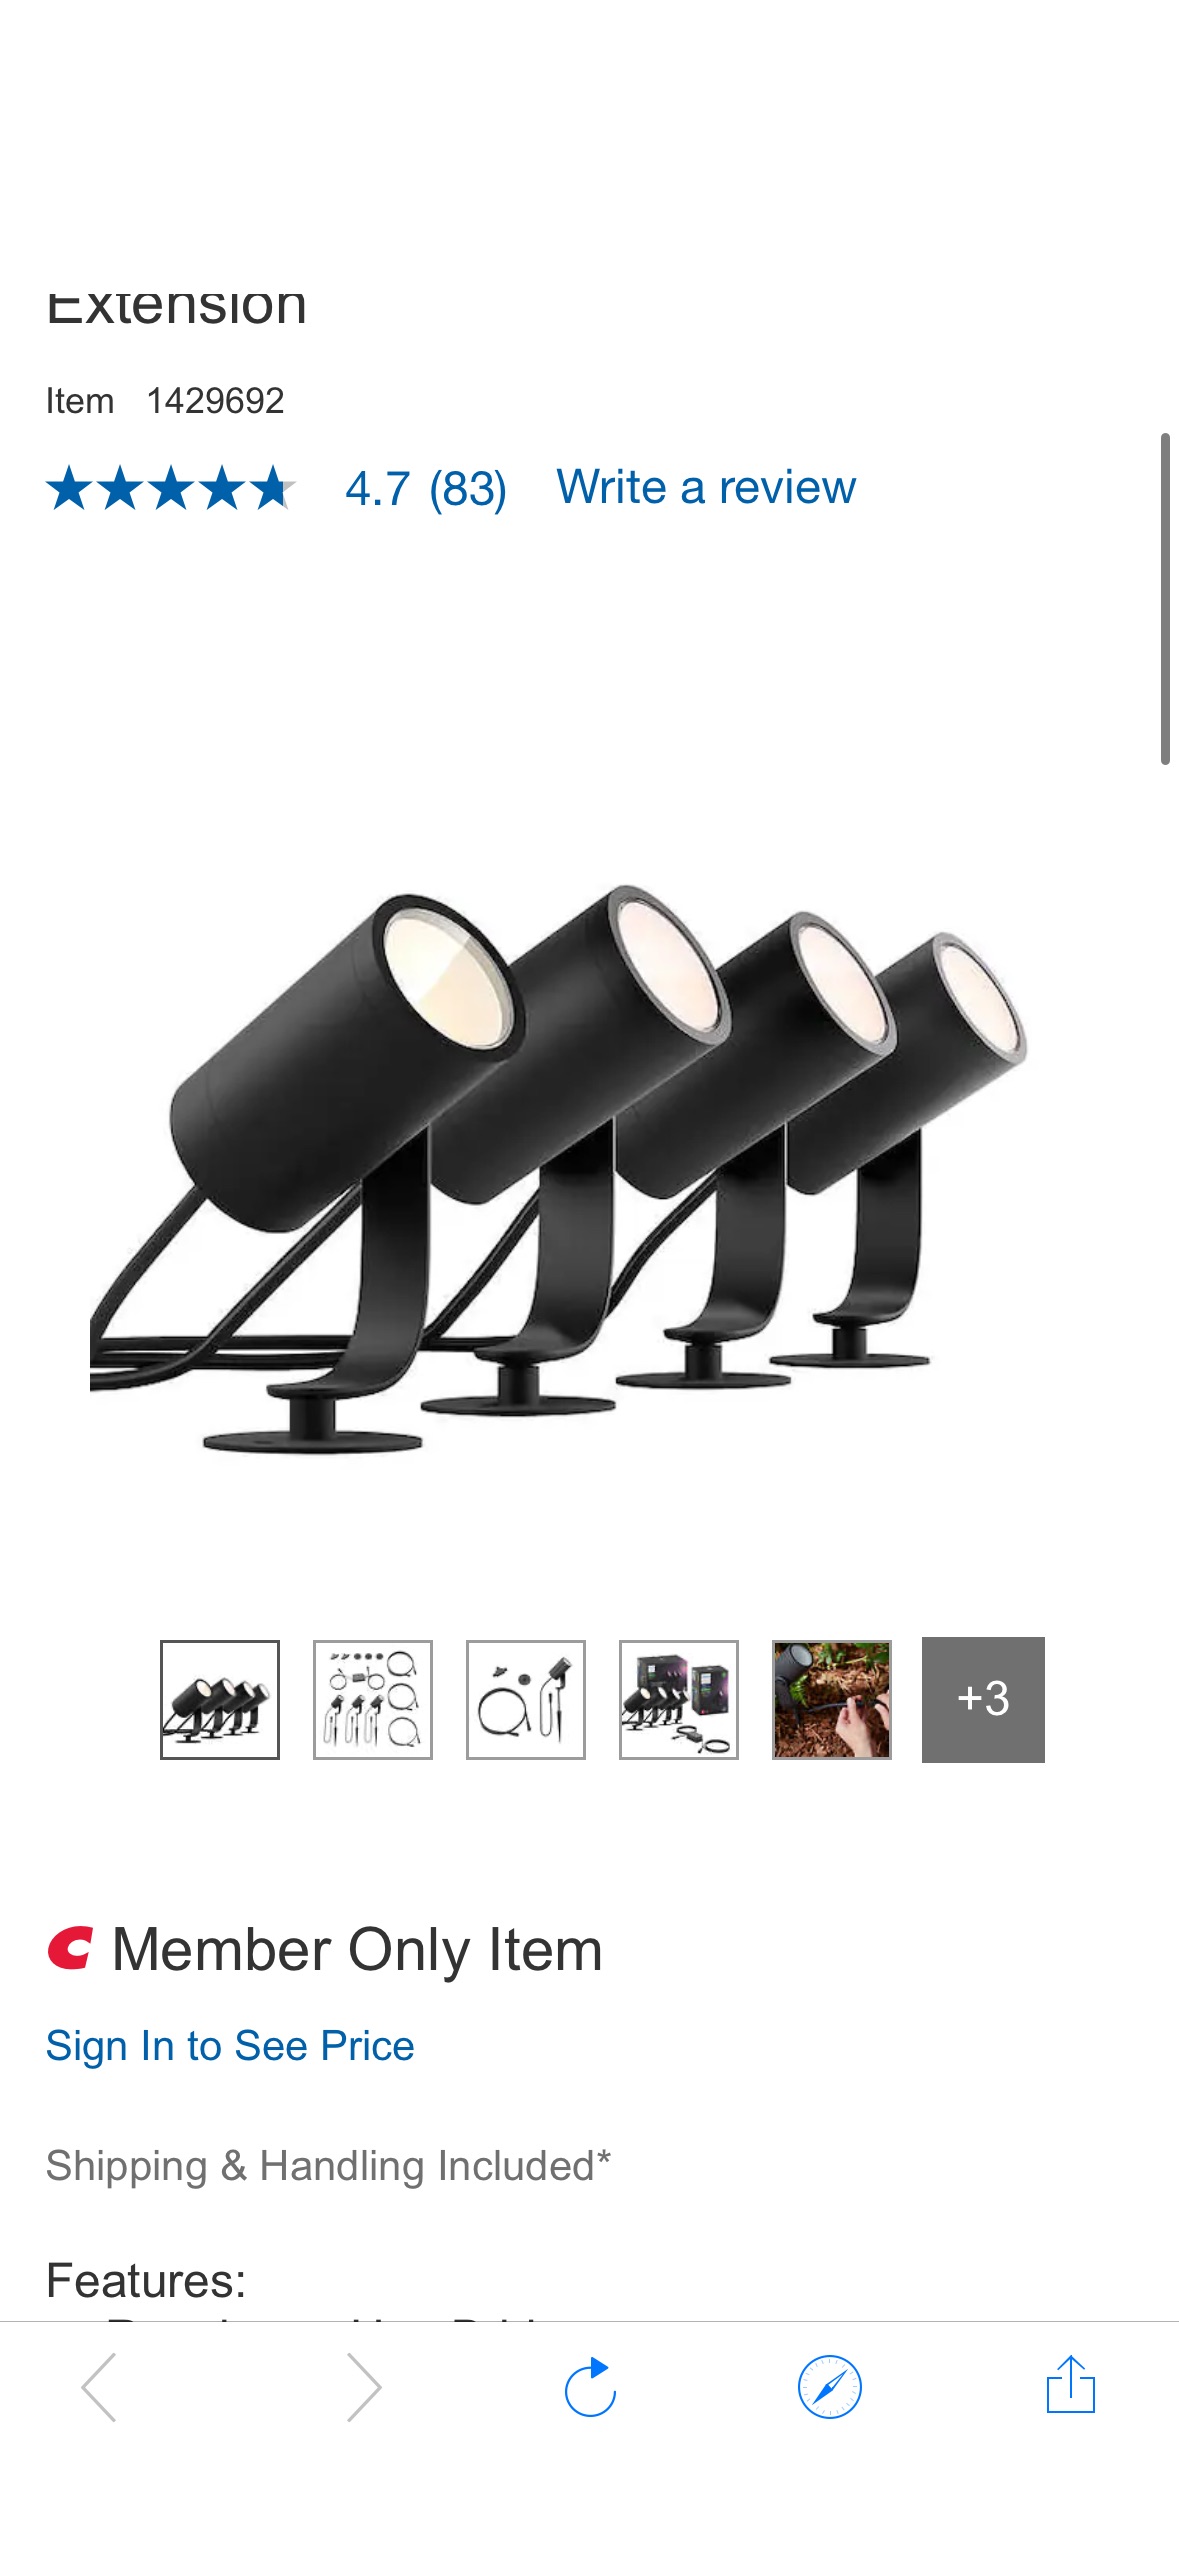 Philips Hue Lily White and Color Outdoor Spotlight Base Kit Plus Extension | Costco